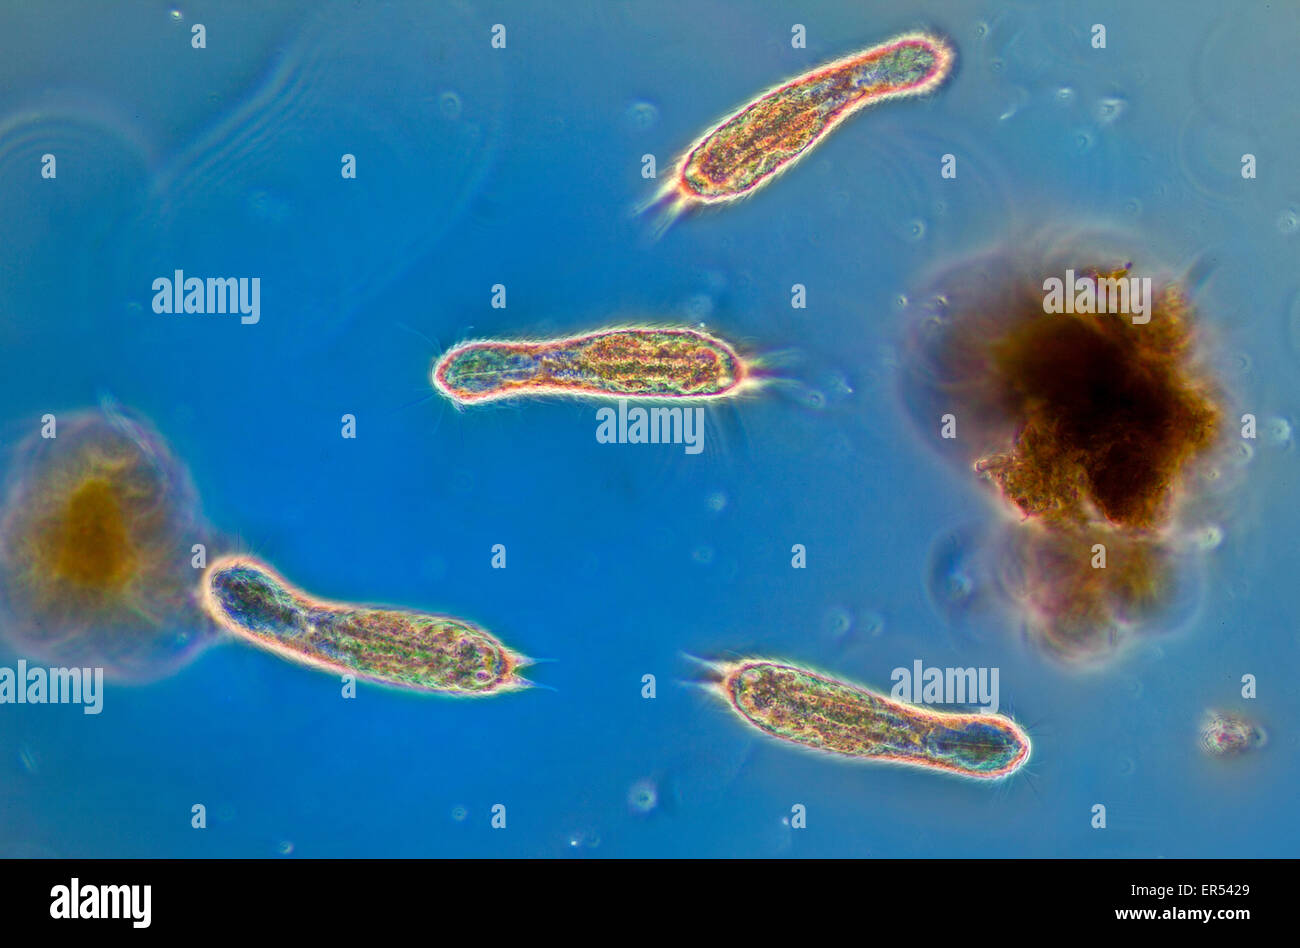 Darkfield photomicrograph, Gastrotrich or 'hairybacks'  (similar to ciliates) in a pond Stock Photo